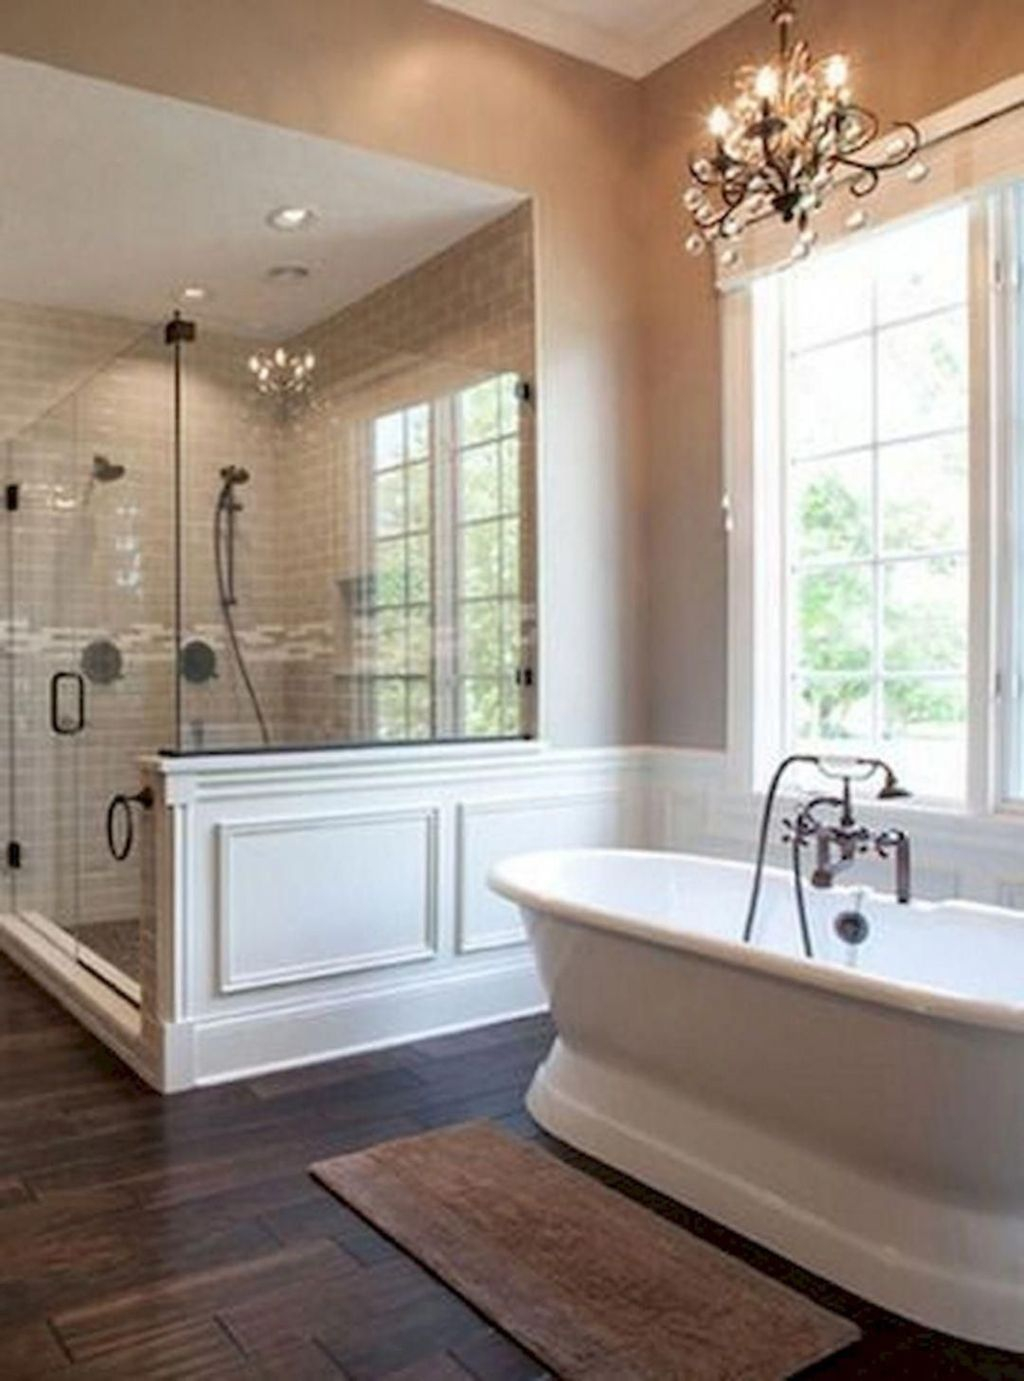 Charming French Country Bathroom Design And Decor Ideas On A Budget21 